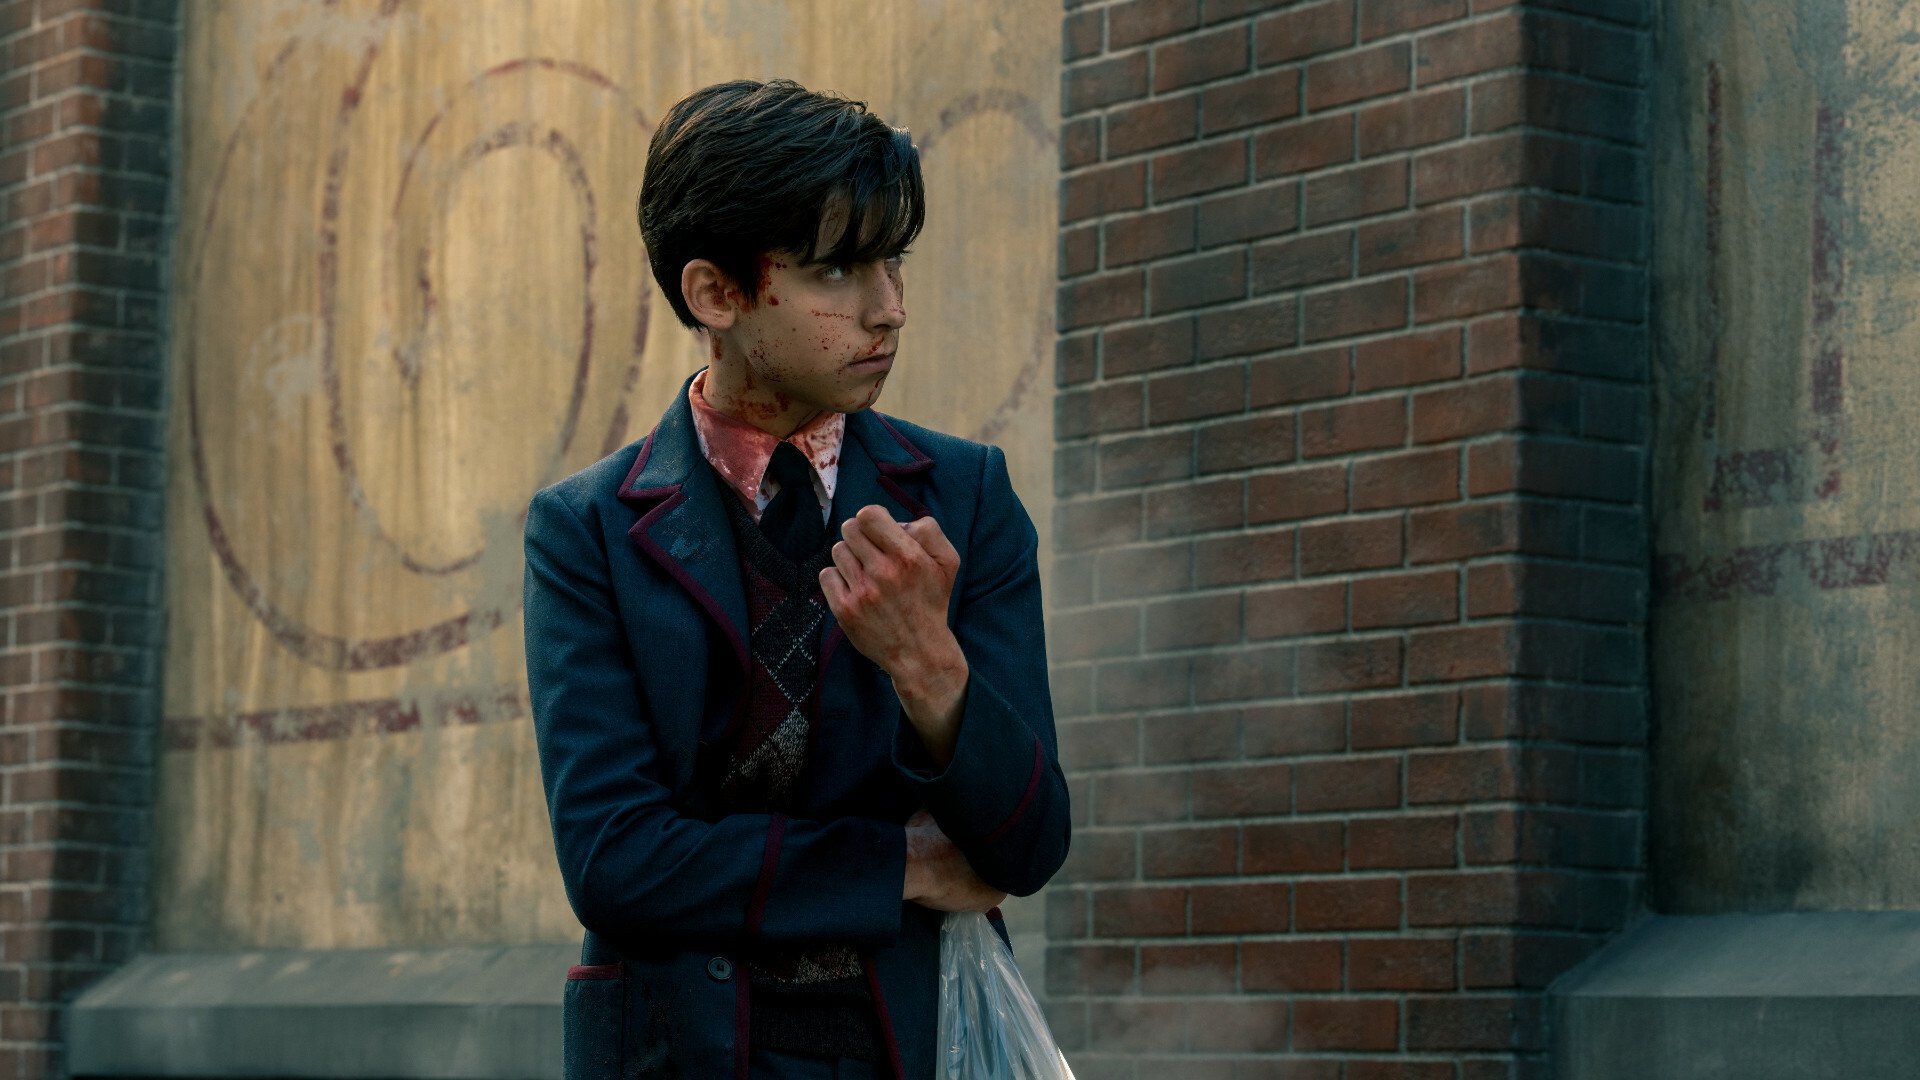 Aidan Gallagher as Number Five in 'The Umbrella Academy' Season 2.